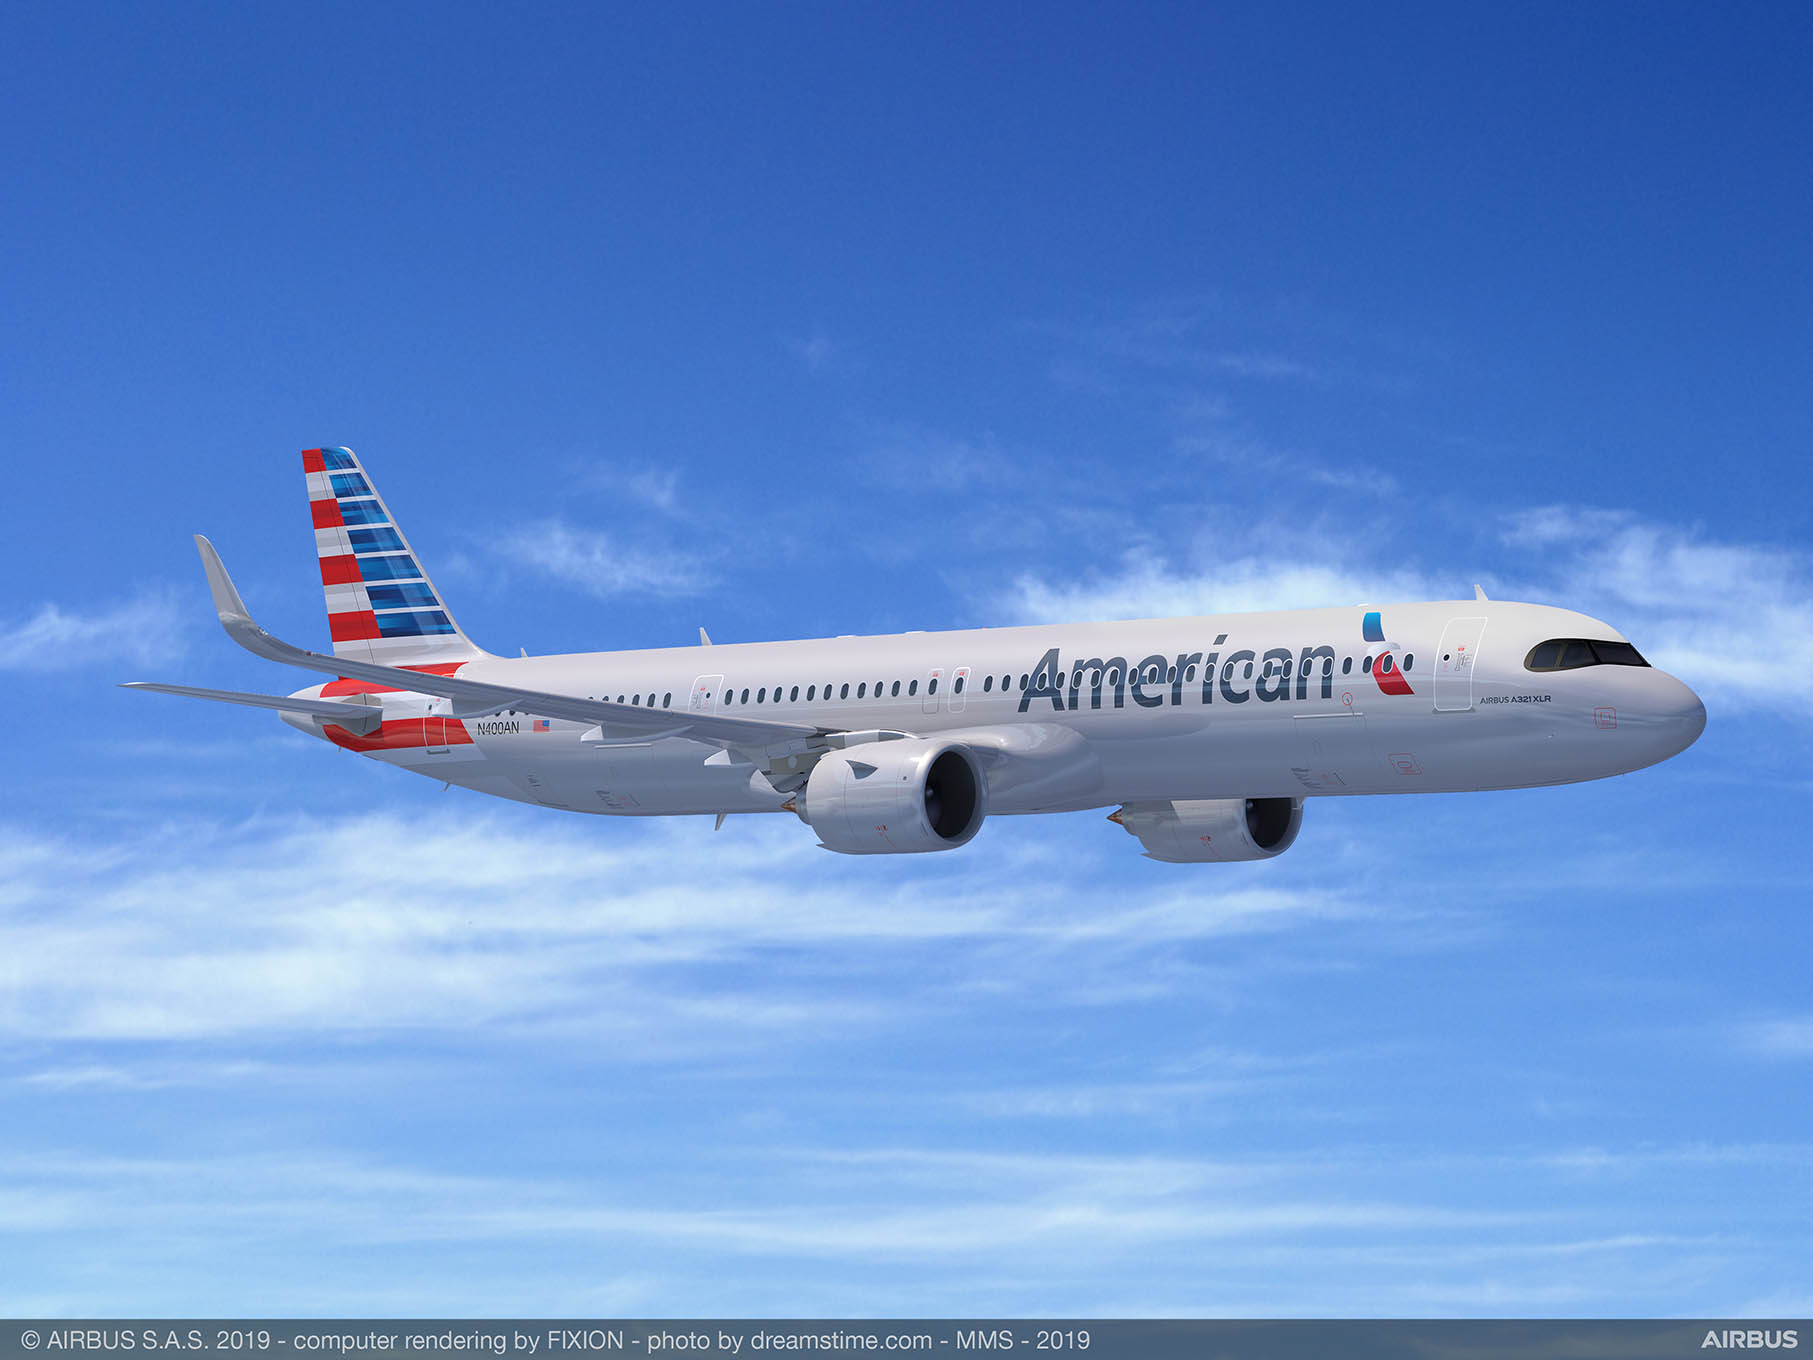 American Airlines to add 25 daily flights from PHX as part of winter schedule